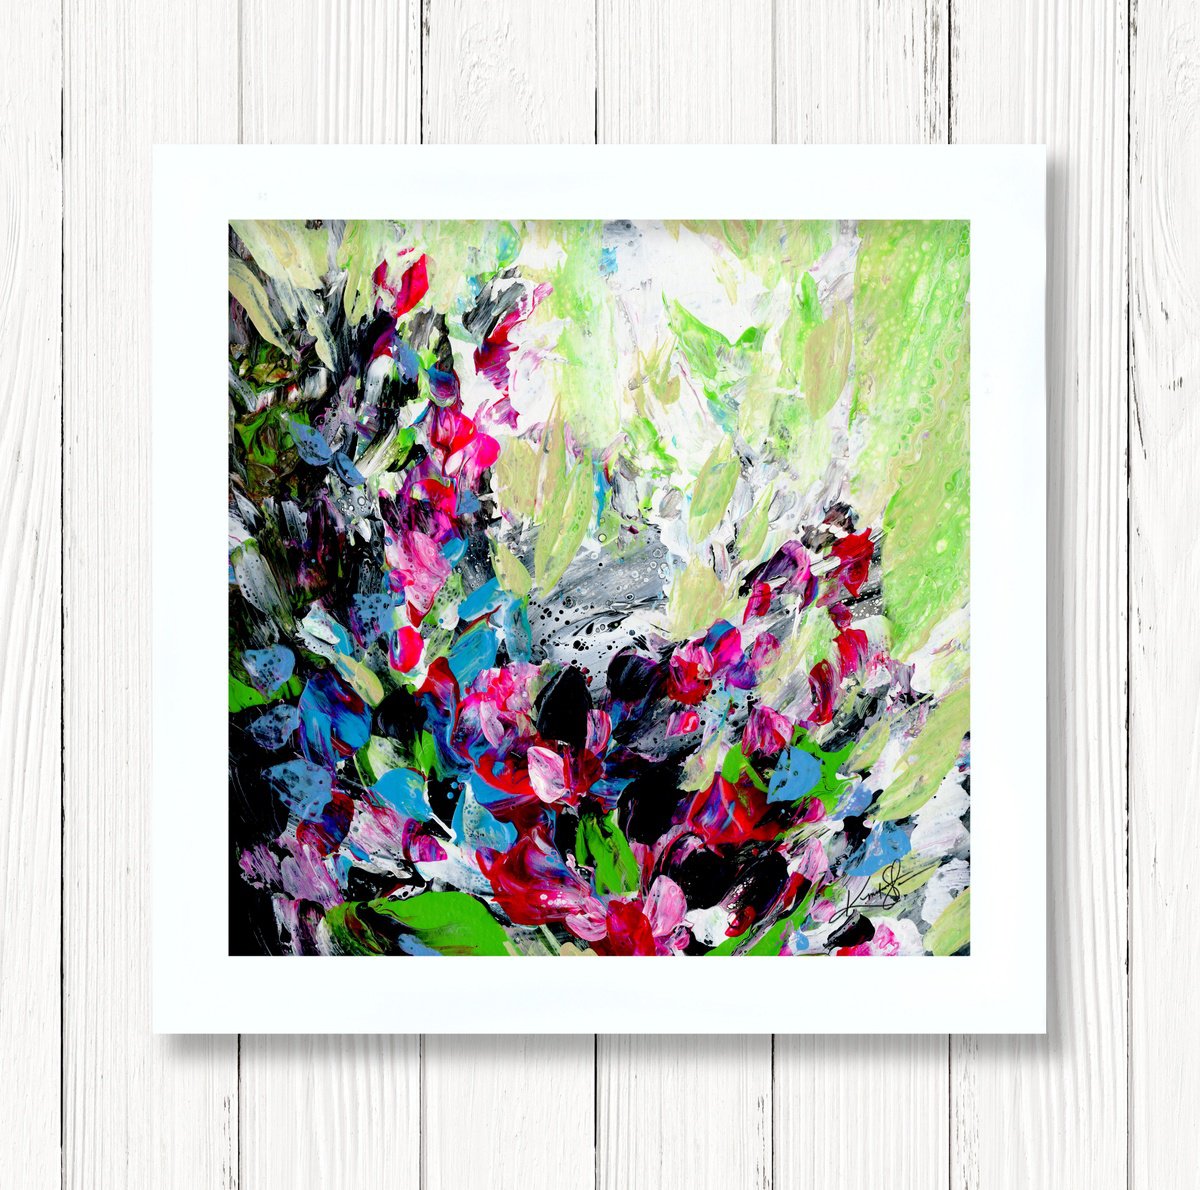 Floral Jubilee 38 - Framed Abstract Floral Art by Kathy Morton Stanion by Kathy Morton Stanion